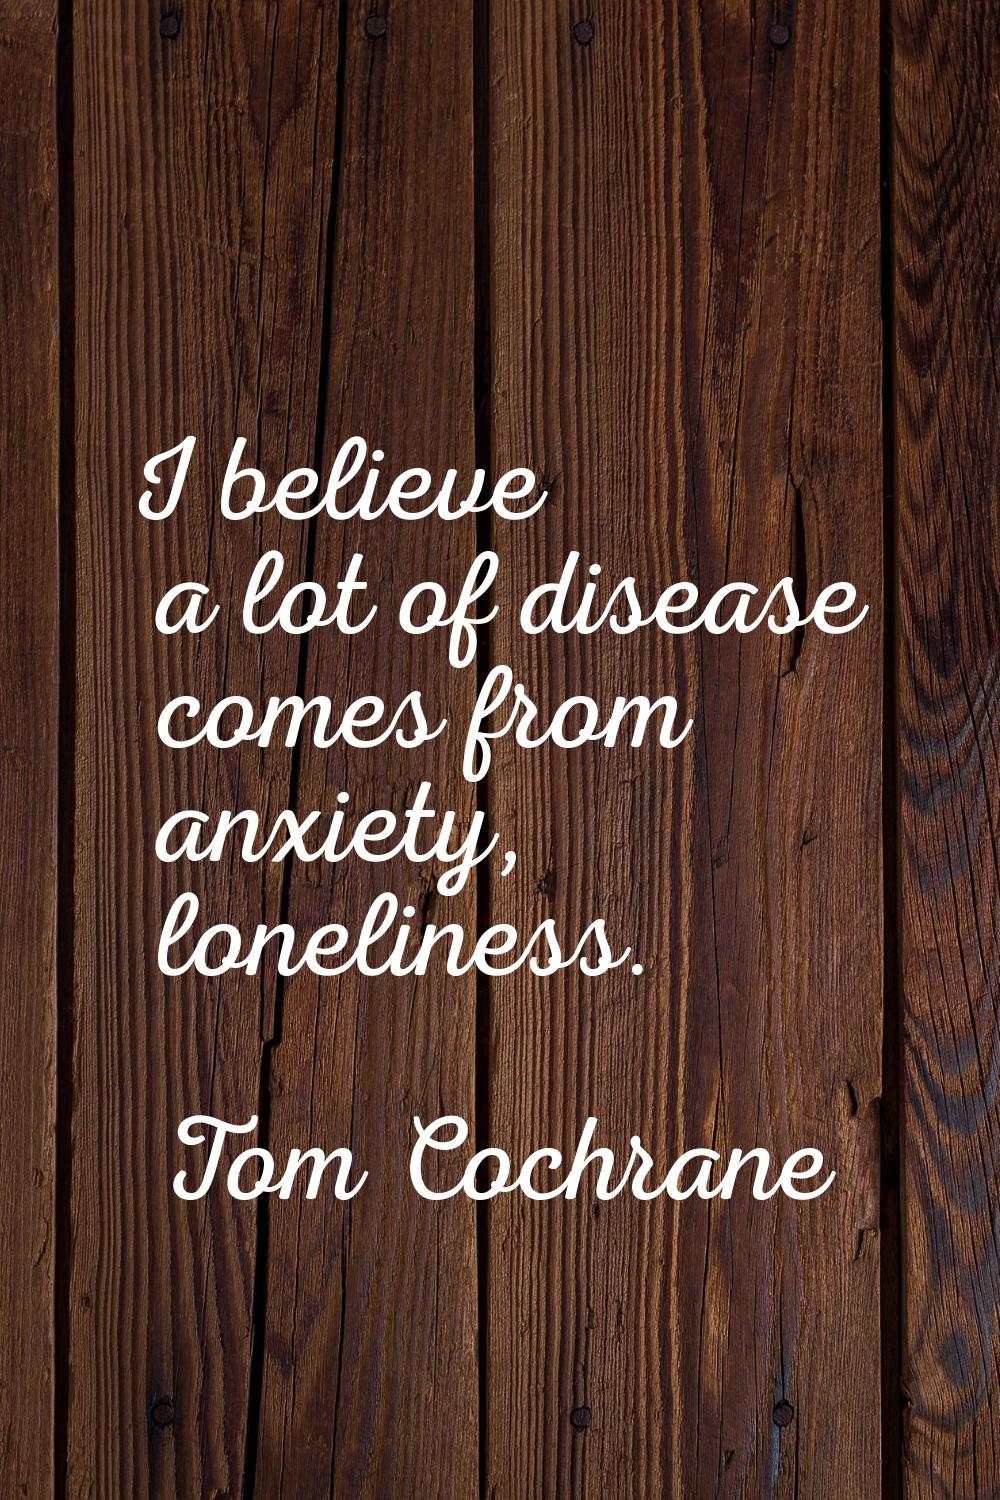 I believe a lot of disease comes from anxiety, loneliness.